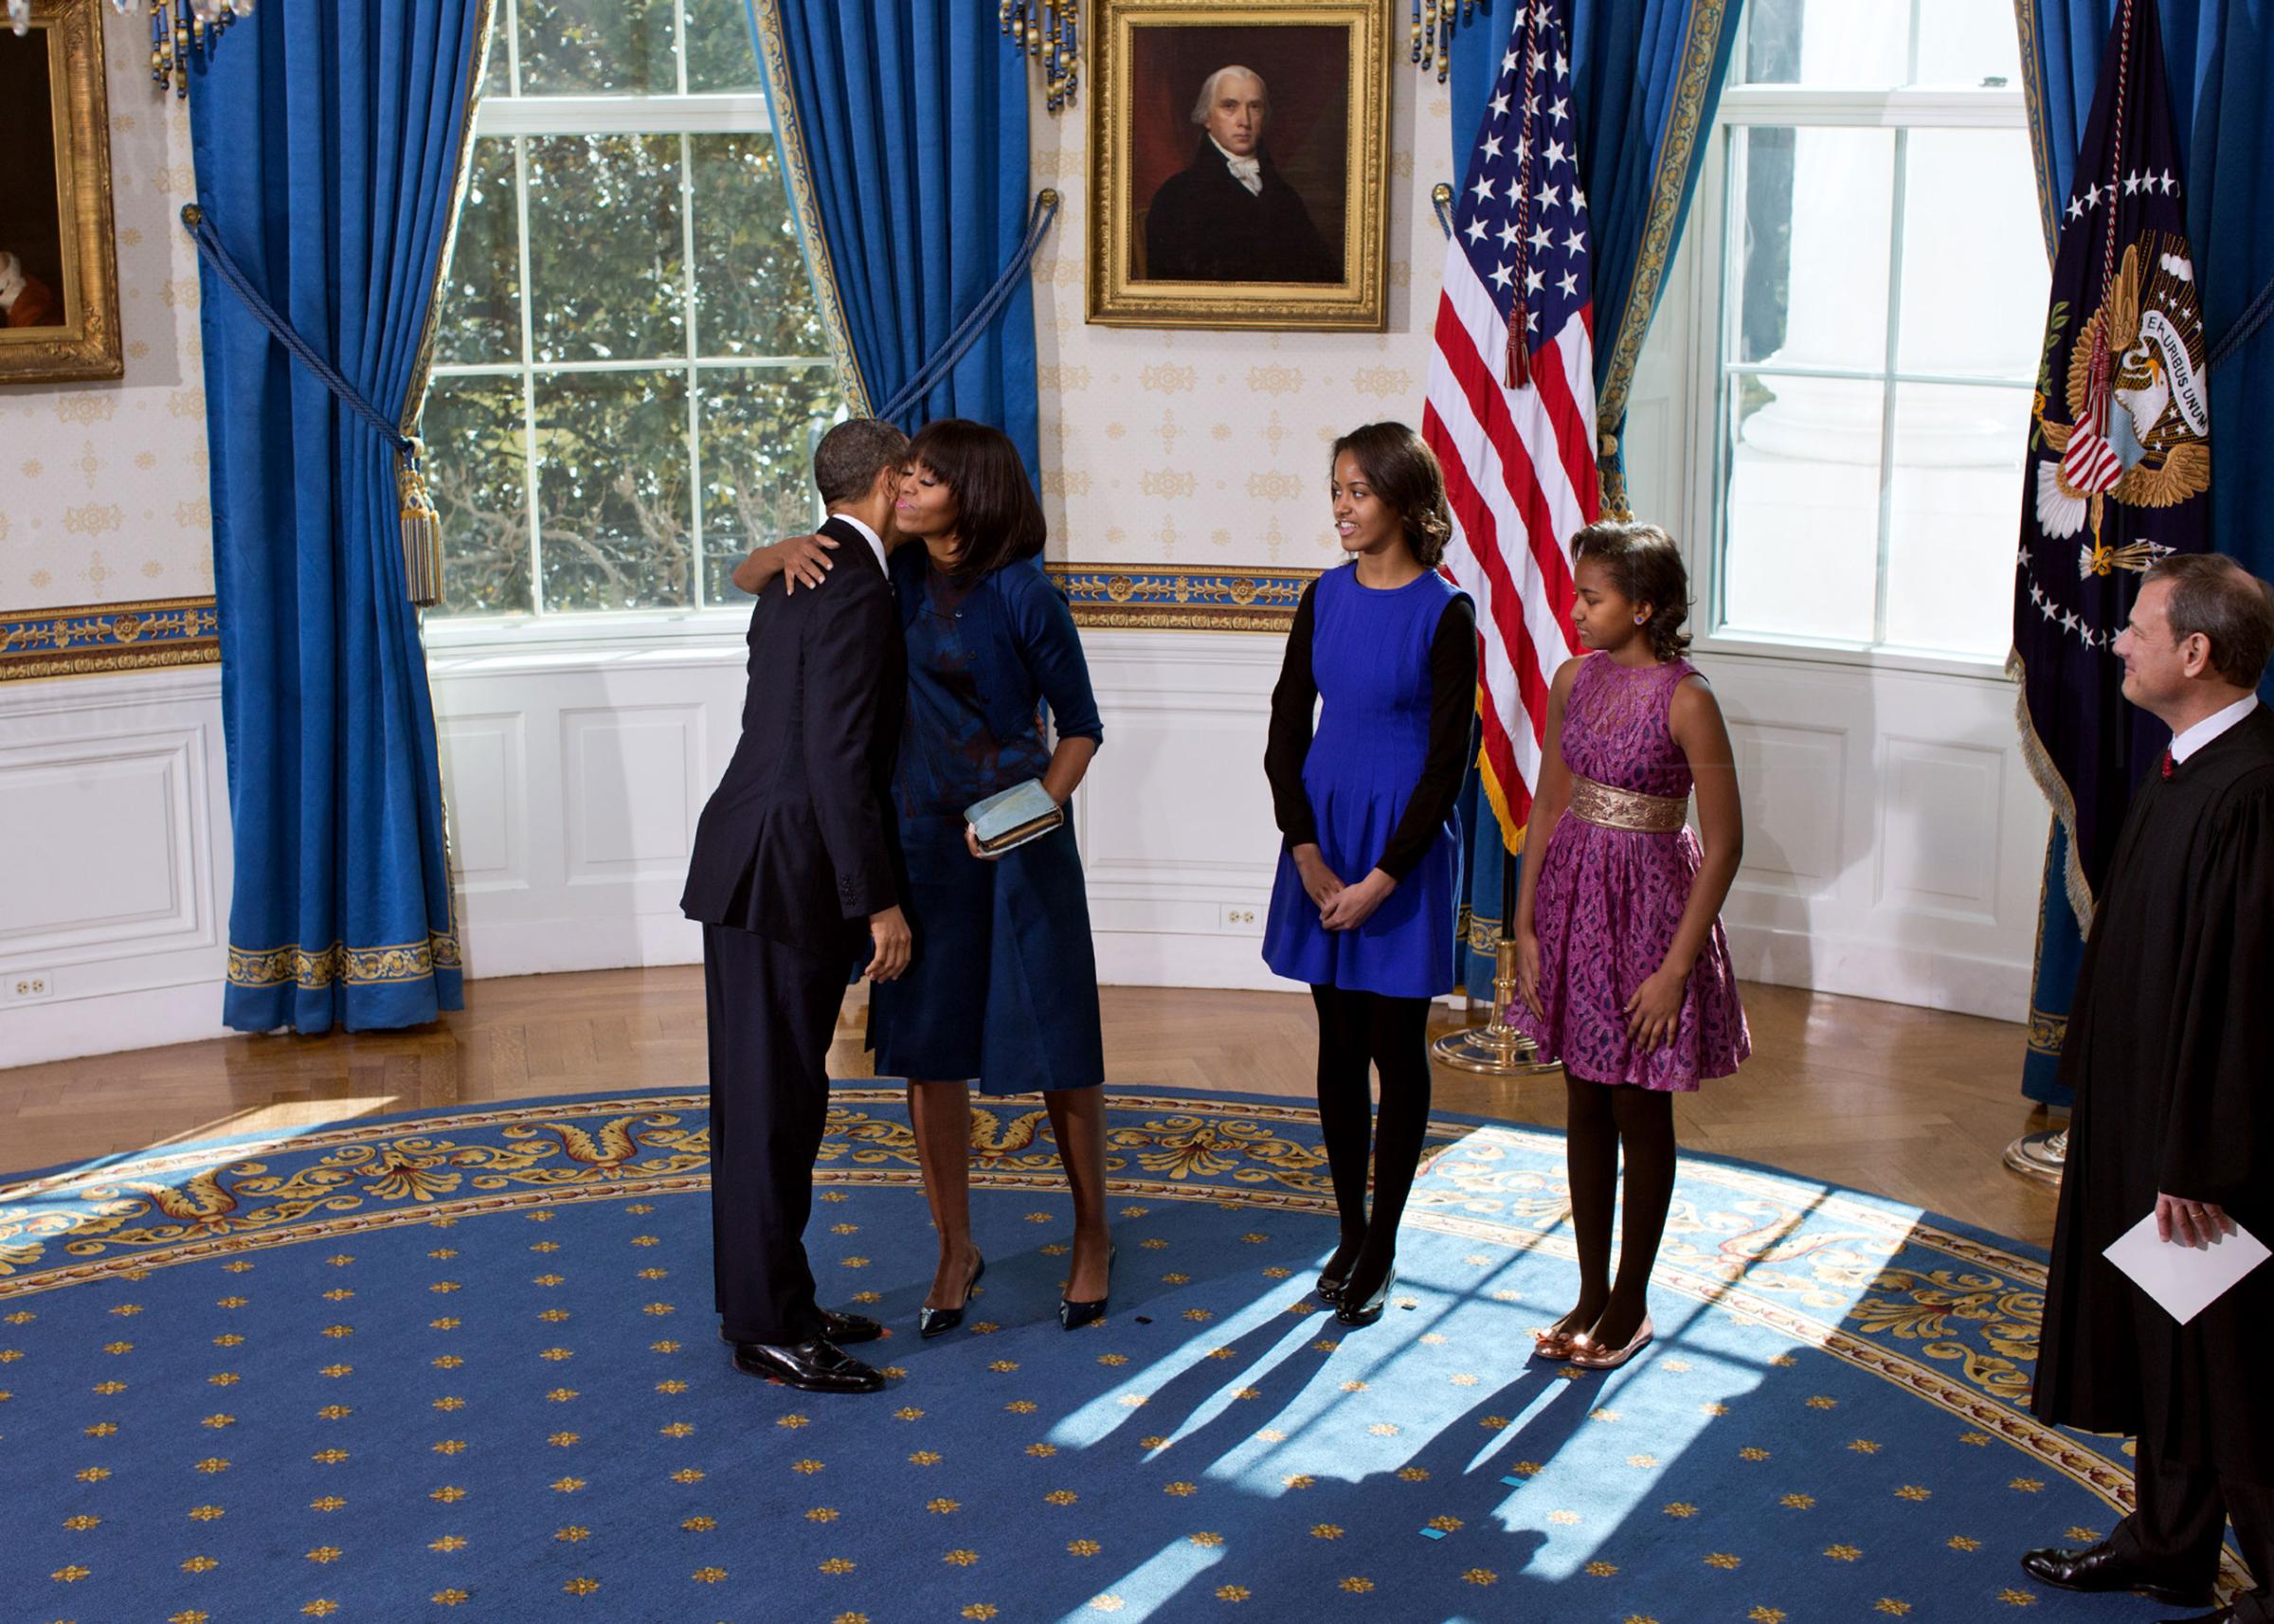 President Barack Obama and First Lady Michelle Obama embrace following the official swearing-in ceremony in the Blue Room of the White House on Inauguration Day, Sunday, Jan. 20, 2013. Standing, from left, are daughters Sasha and Malia and Supreme Court Chief Justice John G. Roberts, Jr.